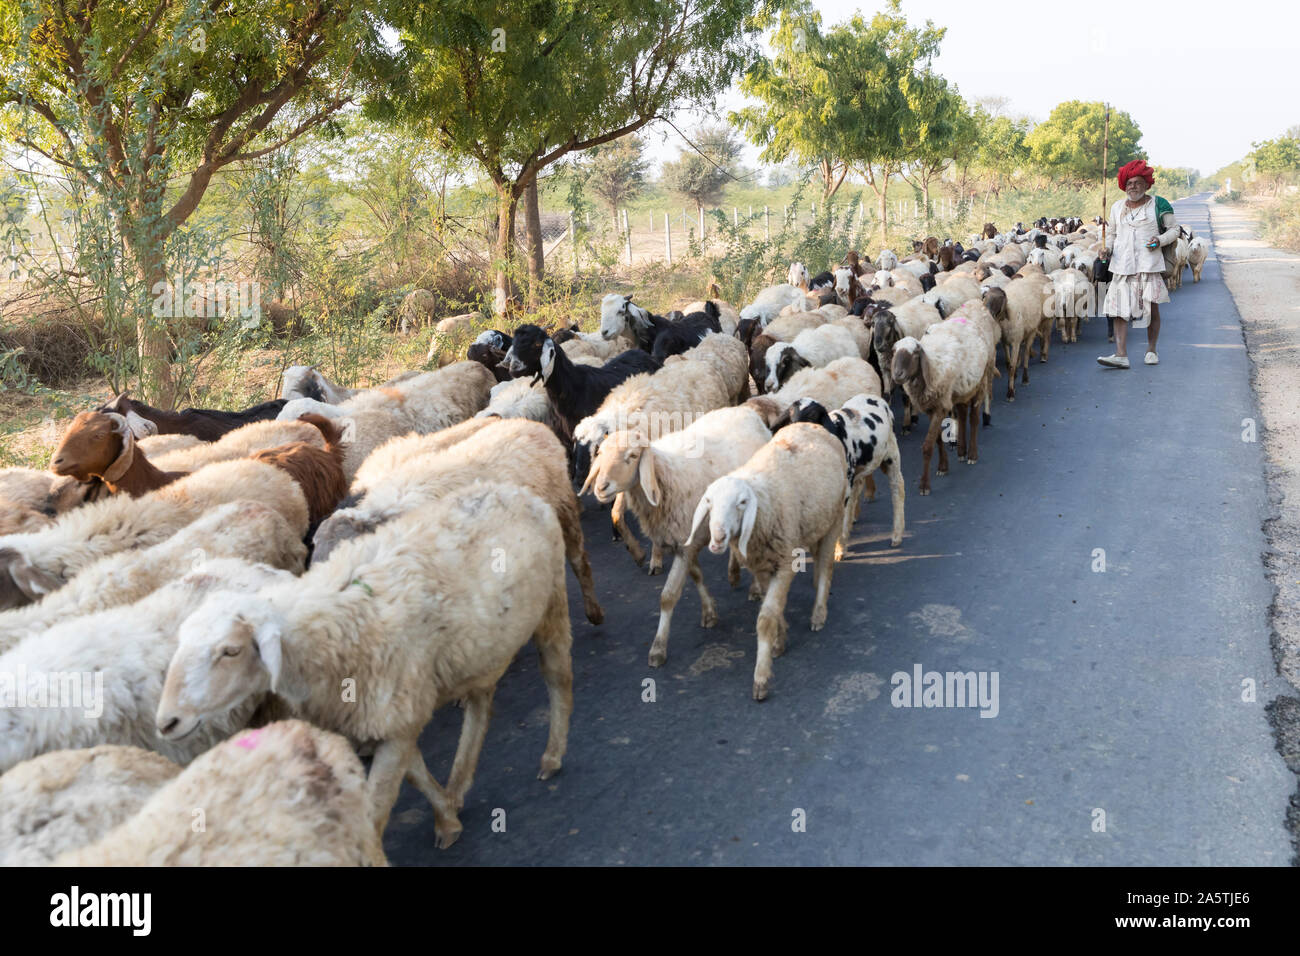 An Indian man in turban shepherds his flock of sheep down a road. Stock Photo